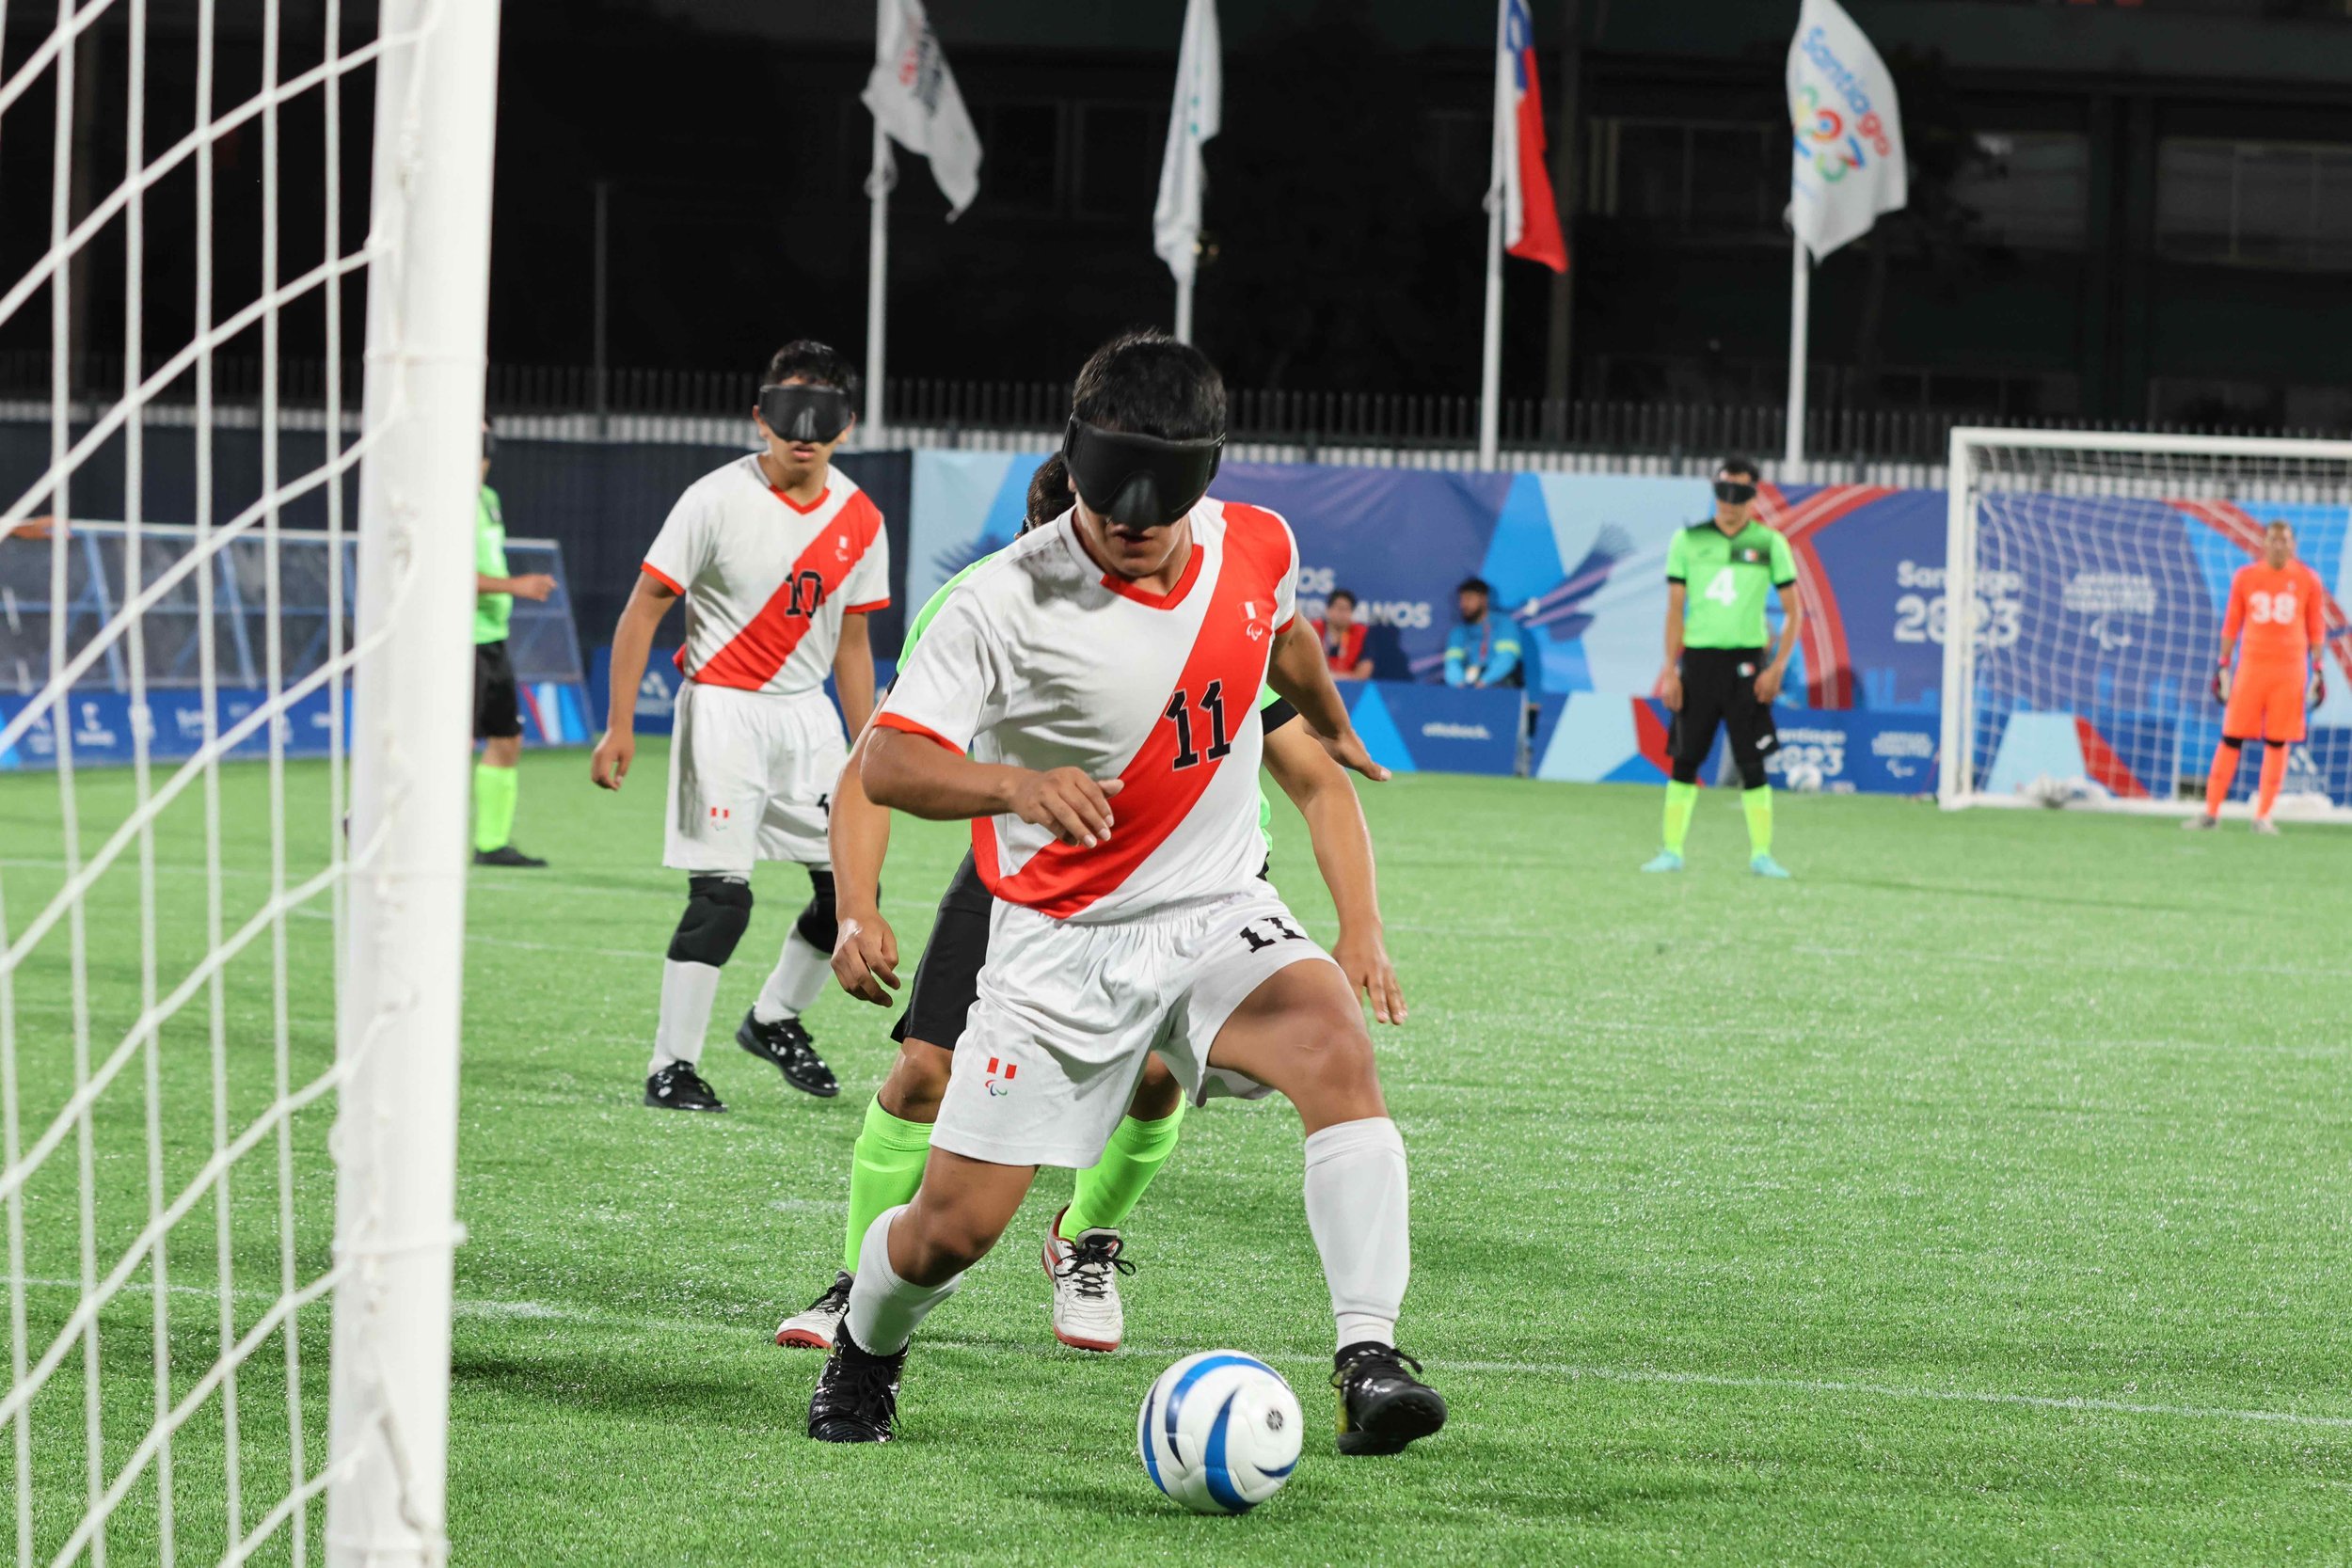 A blind soccer players dribbles the soccer ball towards the goal as players follow shortly behind.